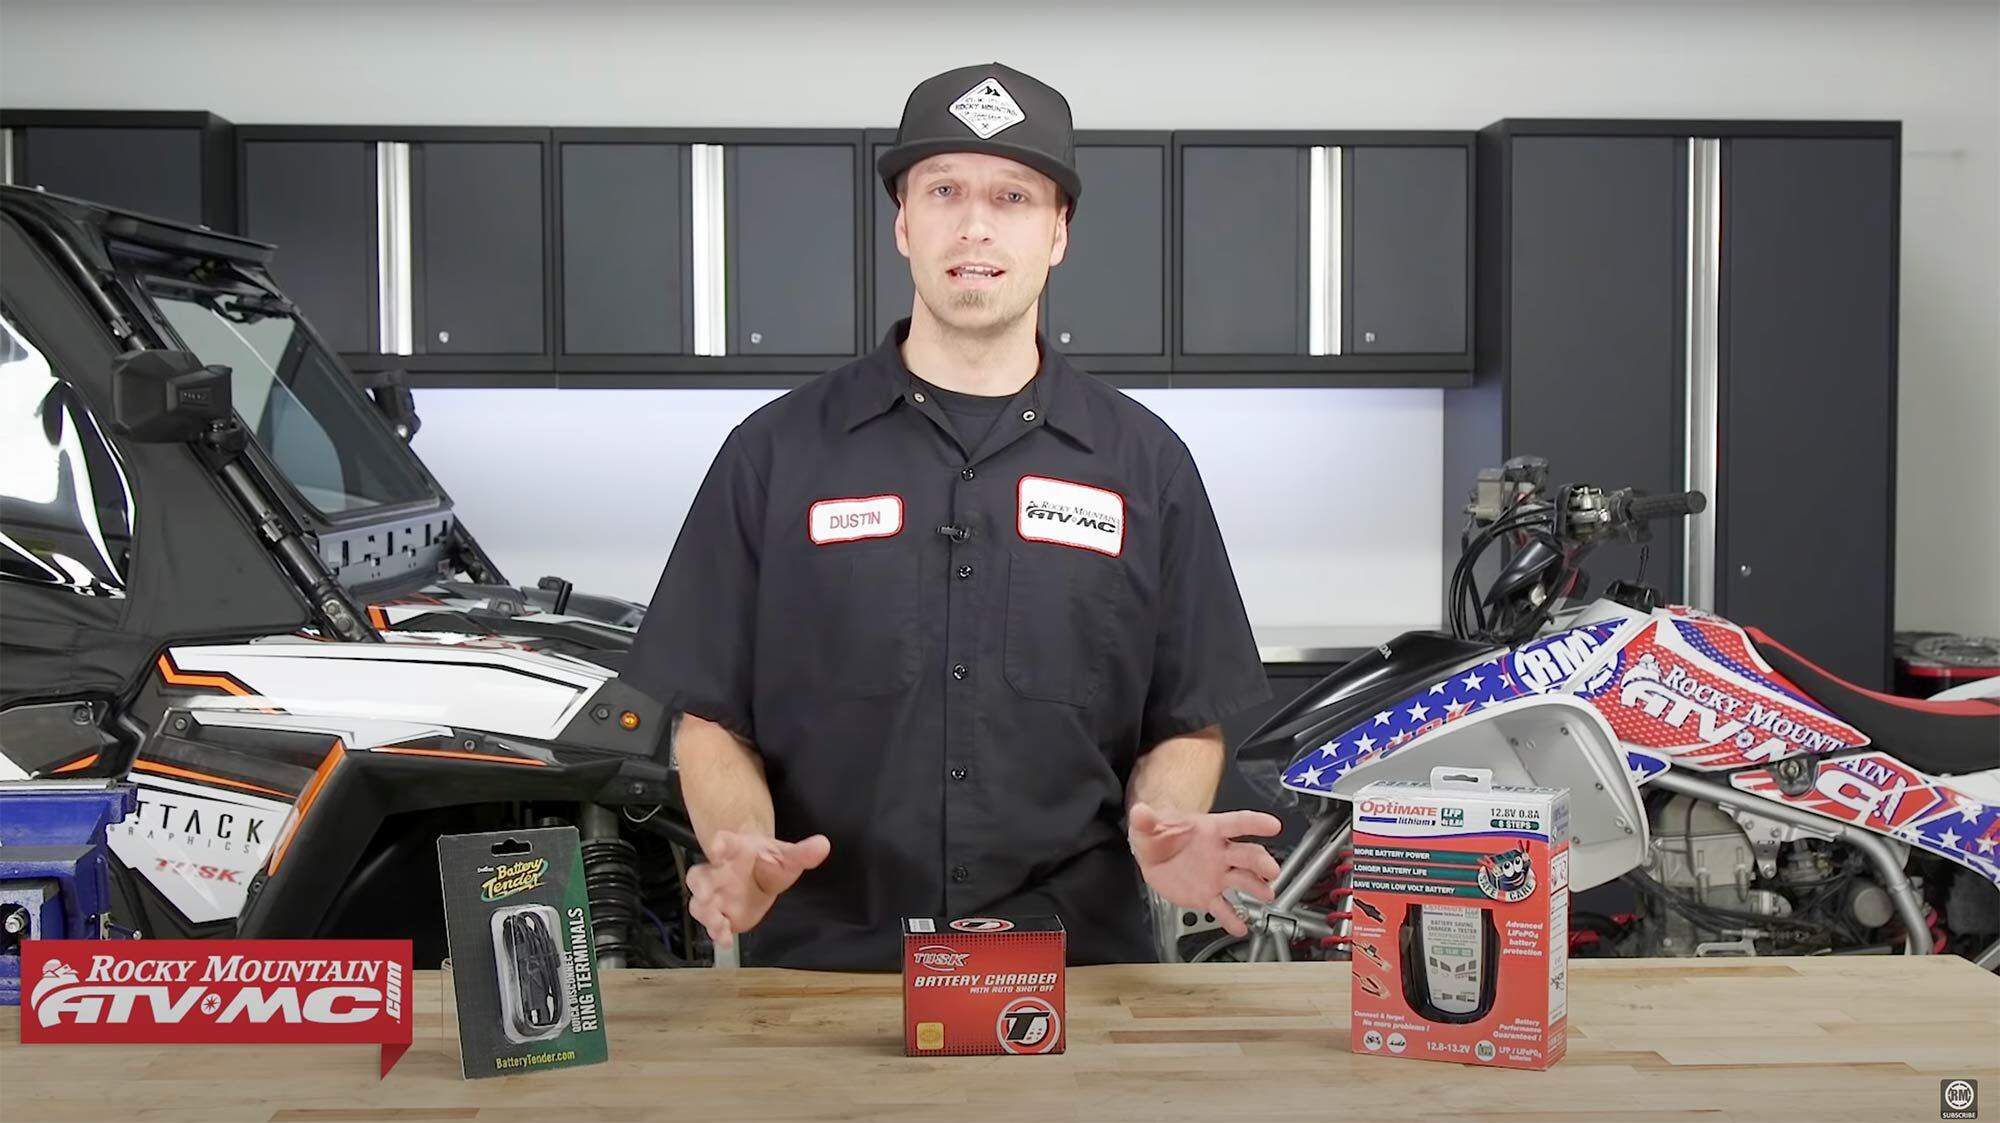 Battery tenders are an important part of winterizing your ATV.